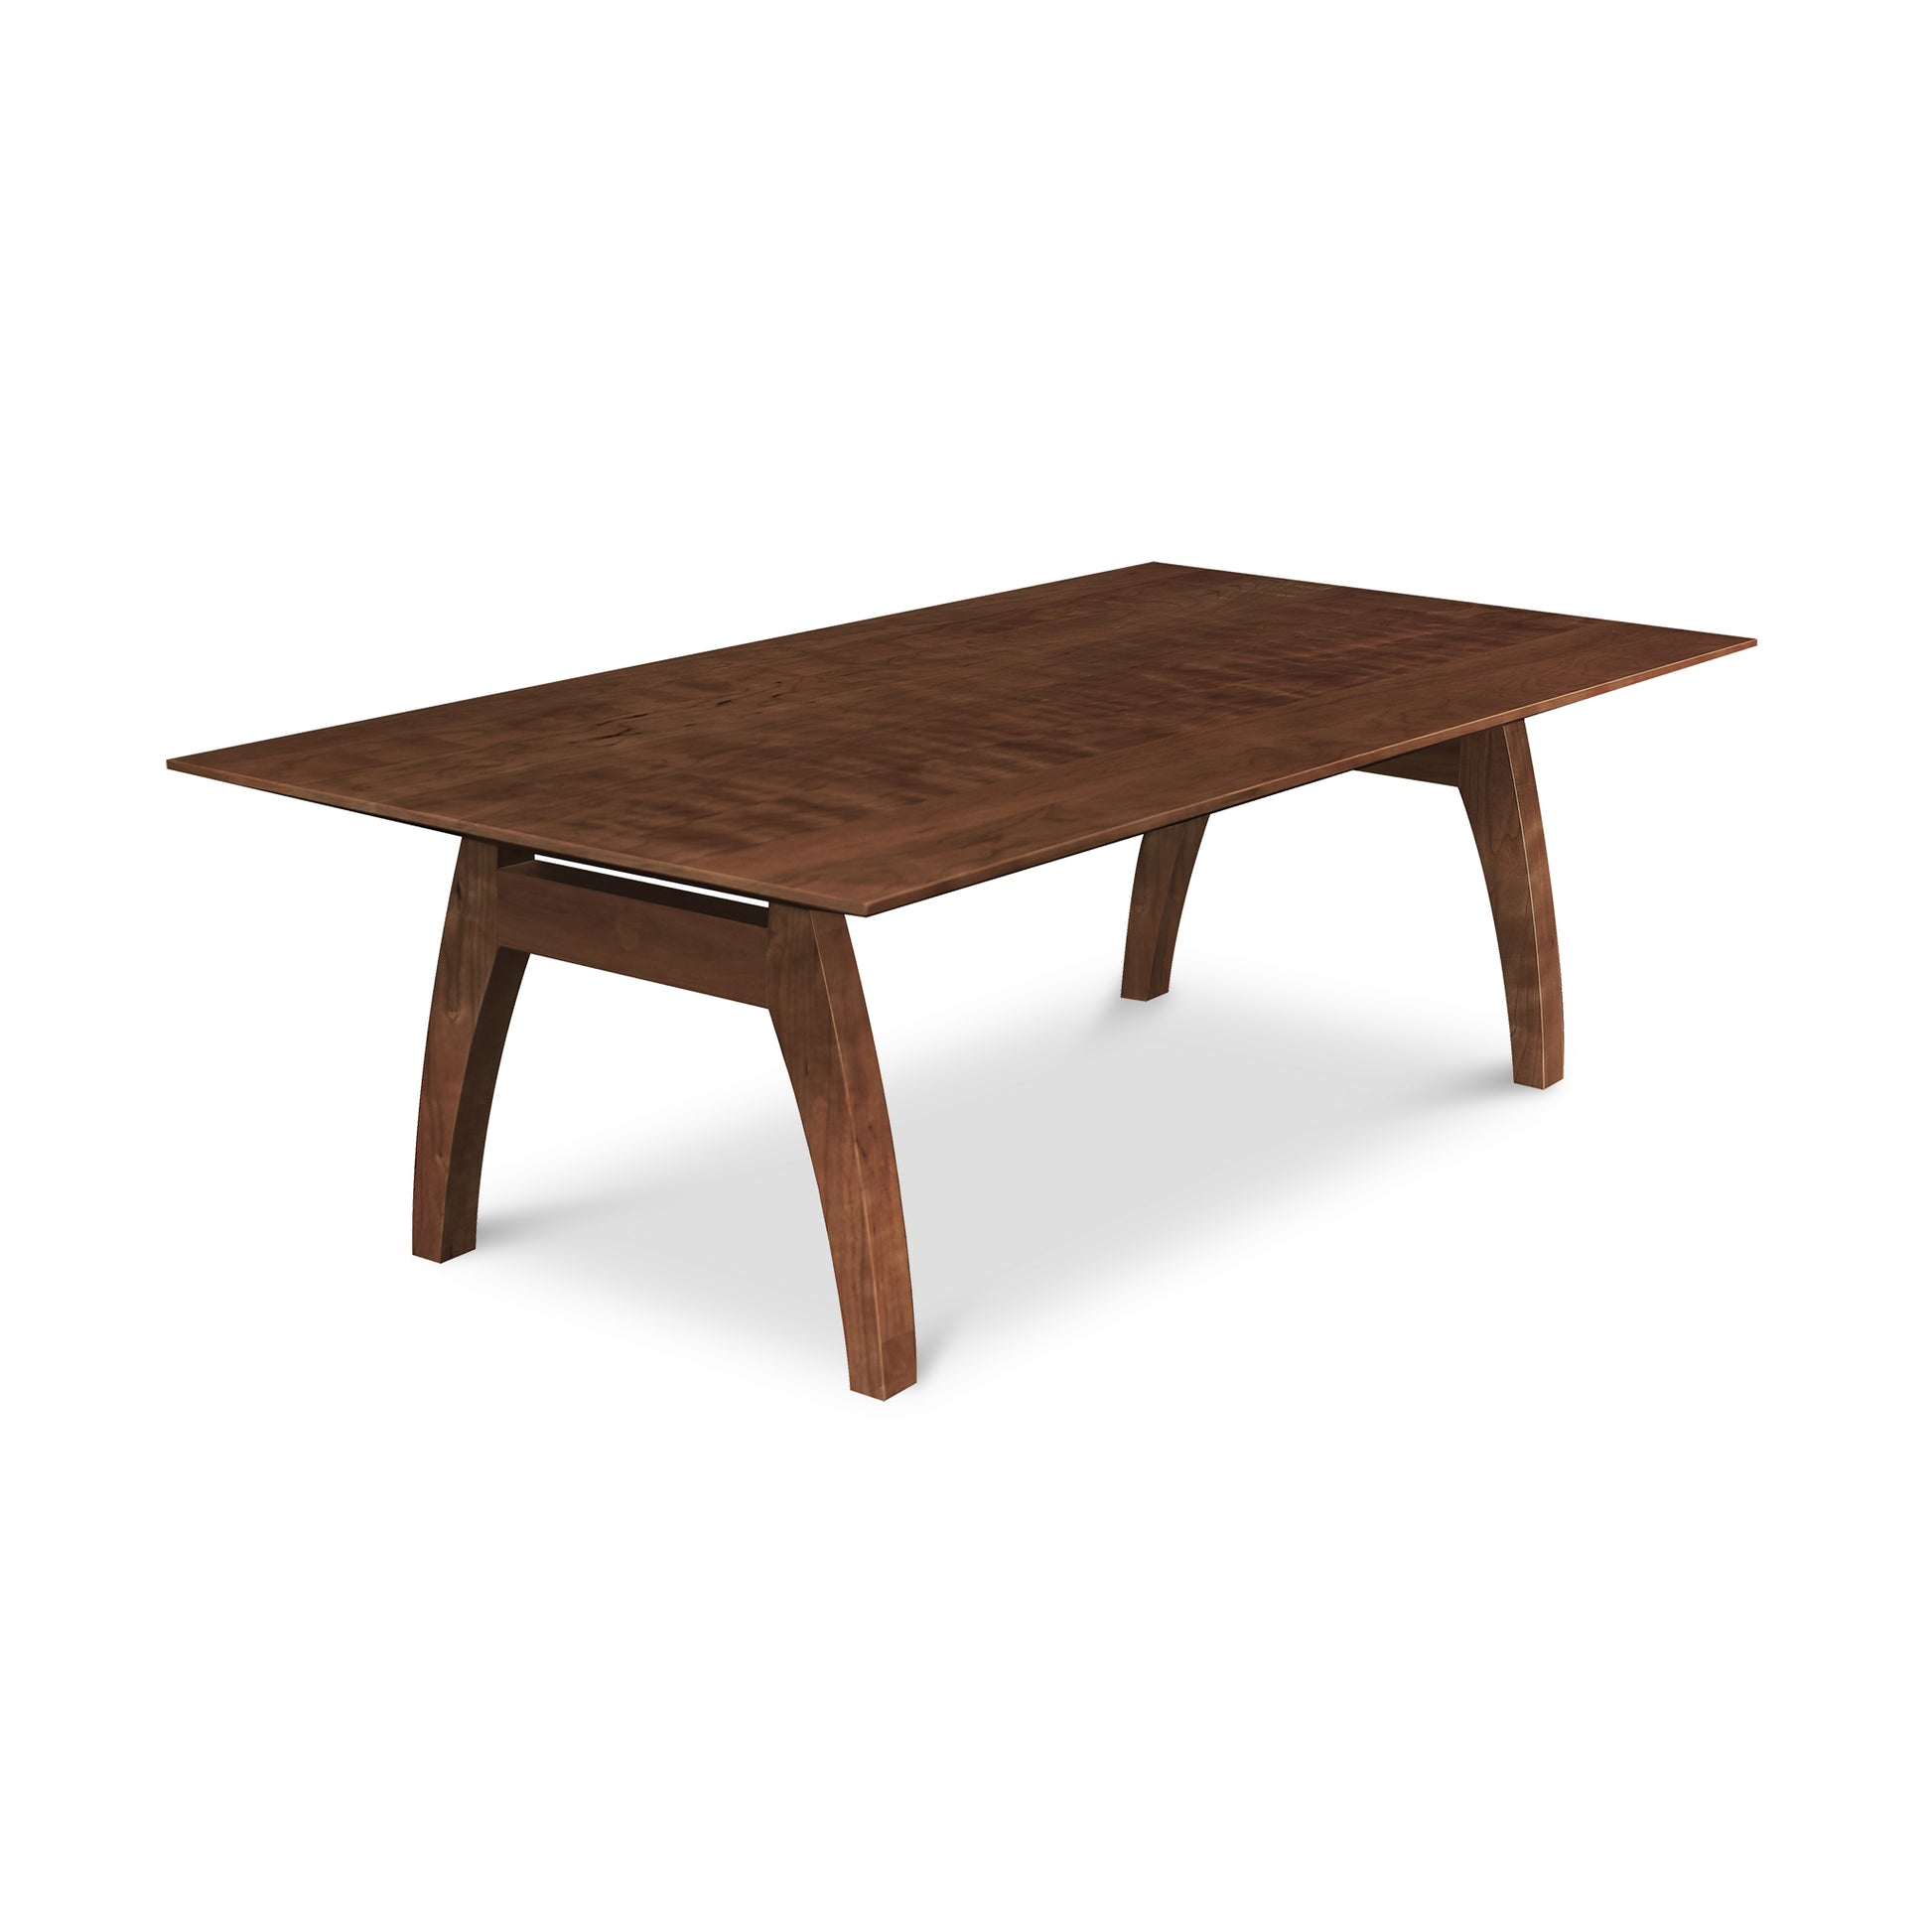 A handmade rectangular Lyndon Furniture dining table with a wooden base, inspired by Vermont Modern design.
